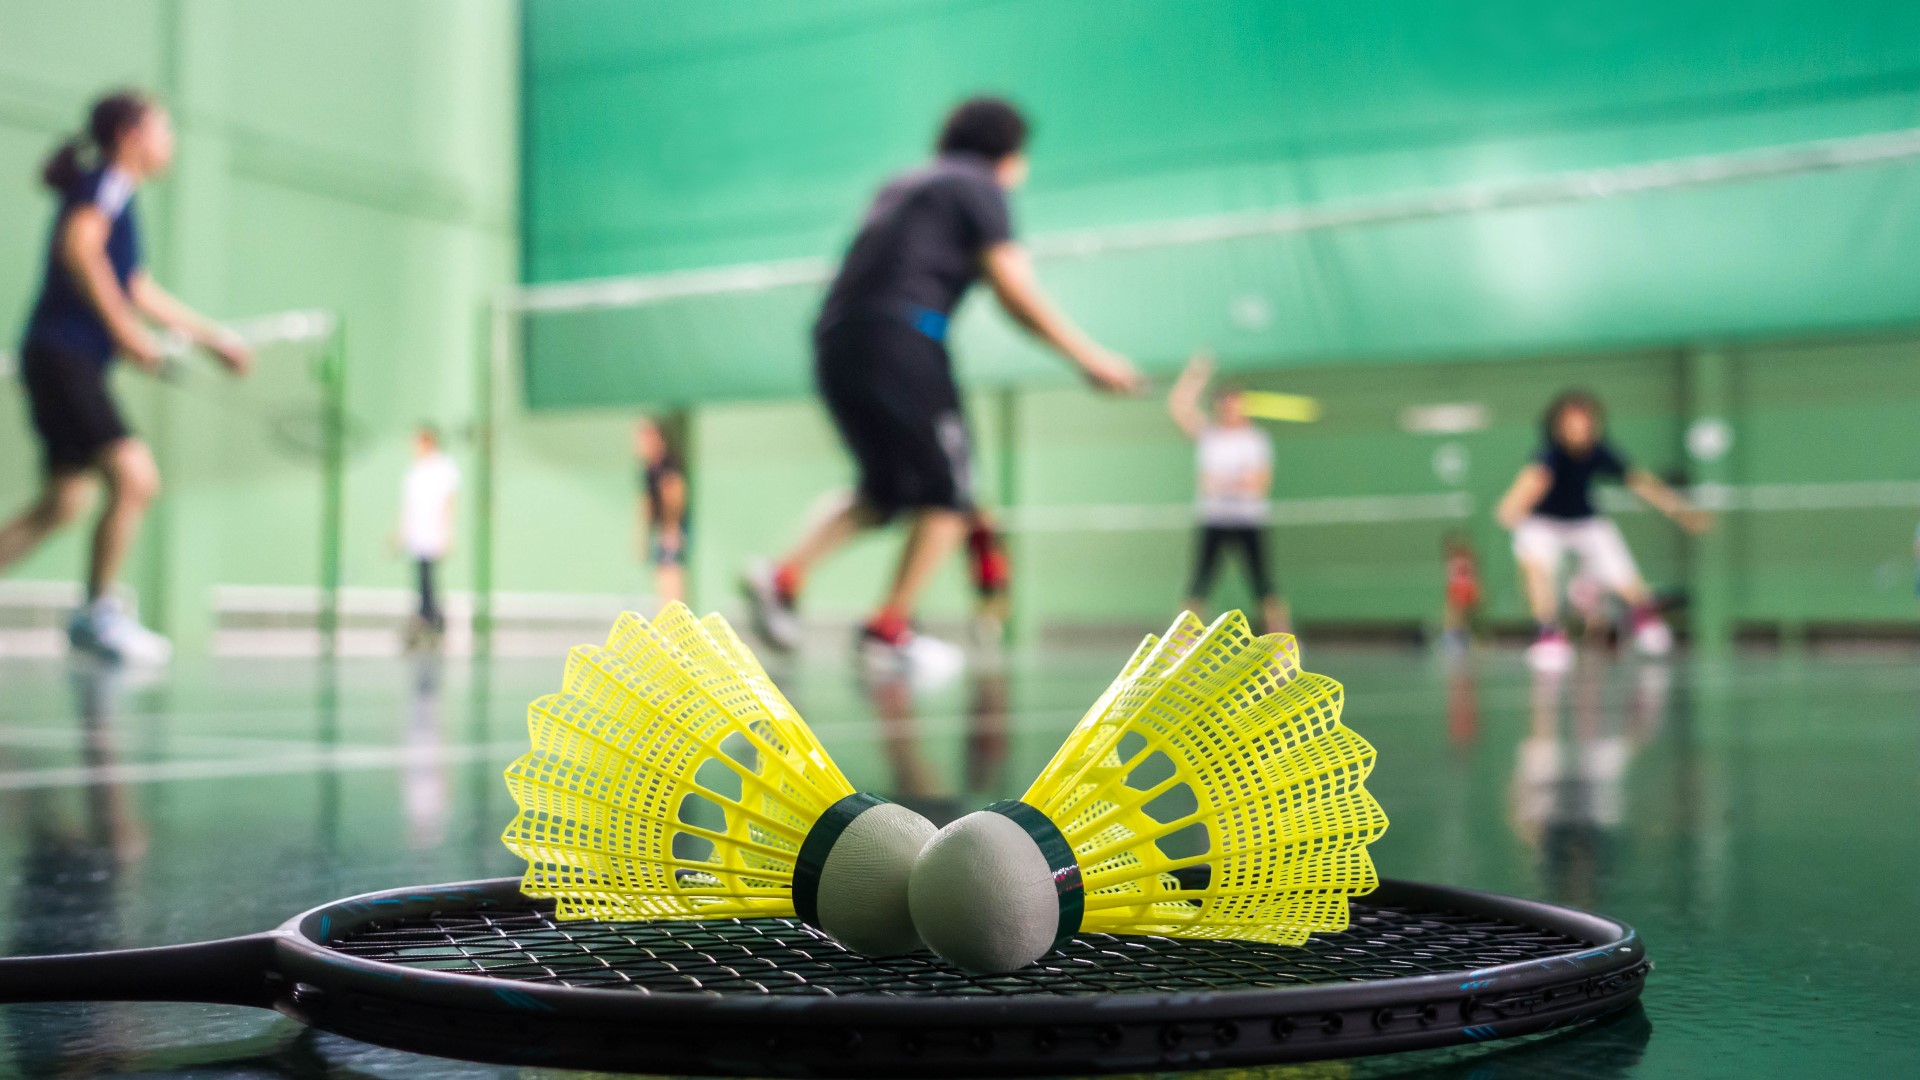 Not only does badminton provide a way to stay active and burn calories, but it has been consistently linked to a number of health benefits.